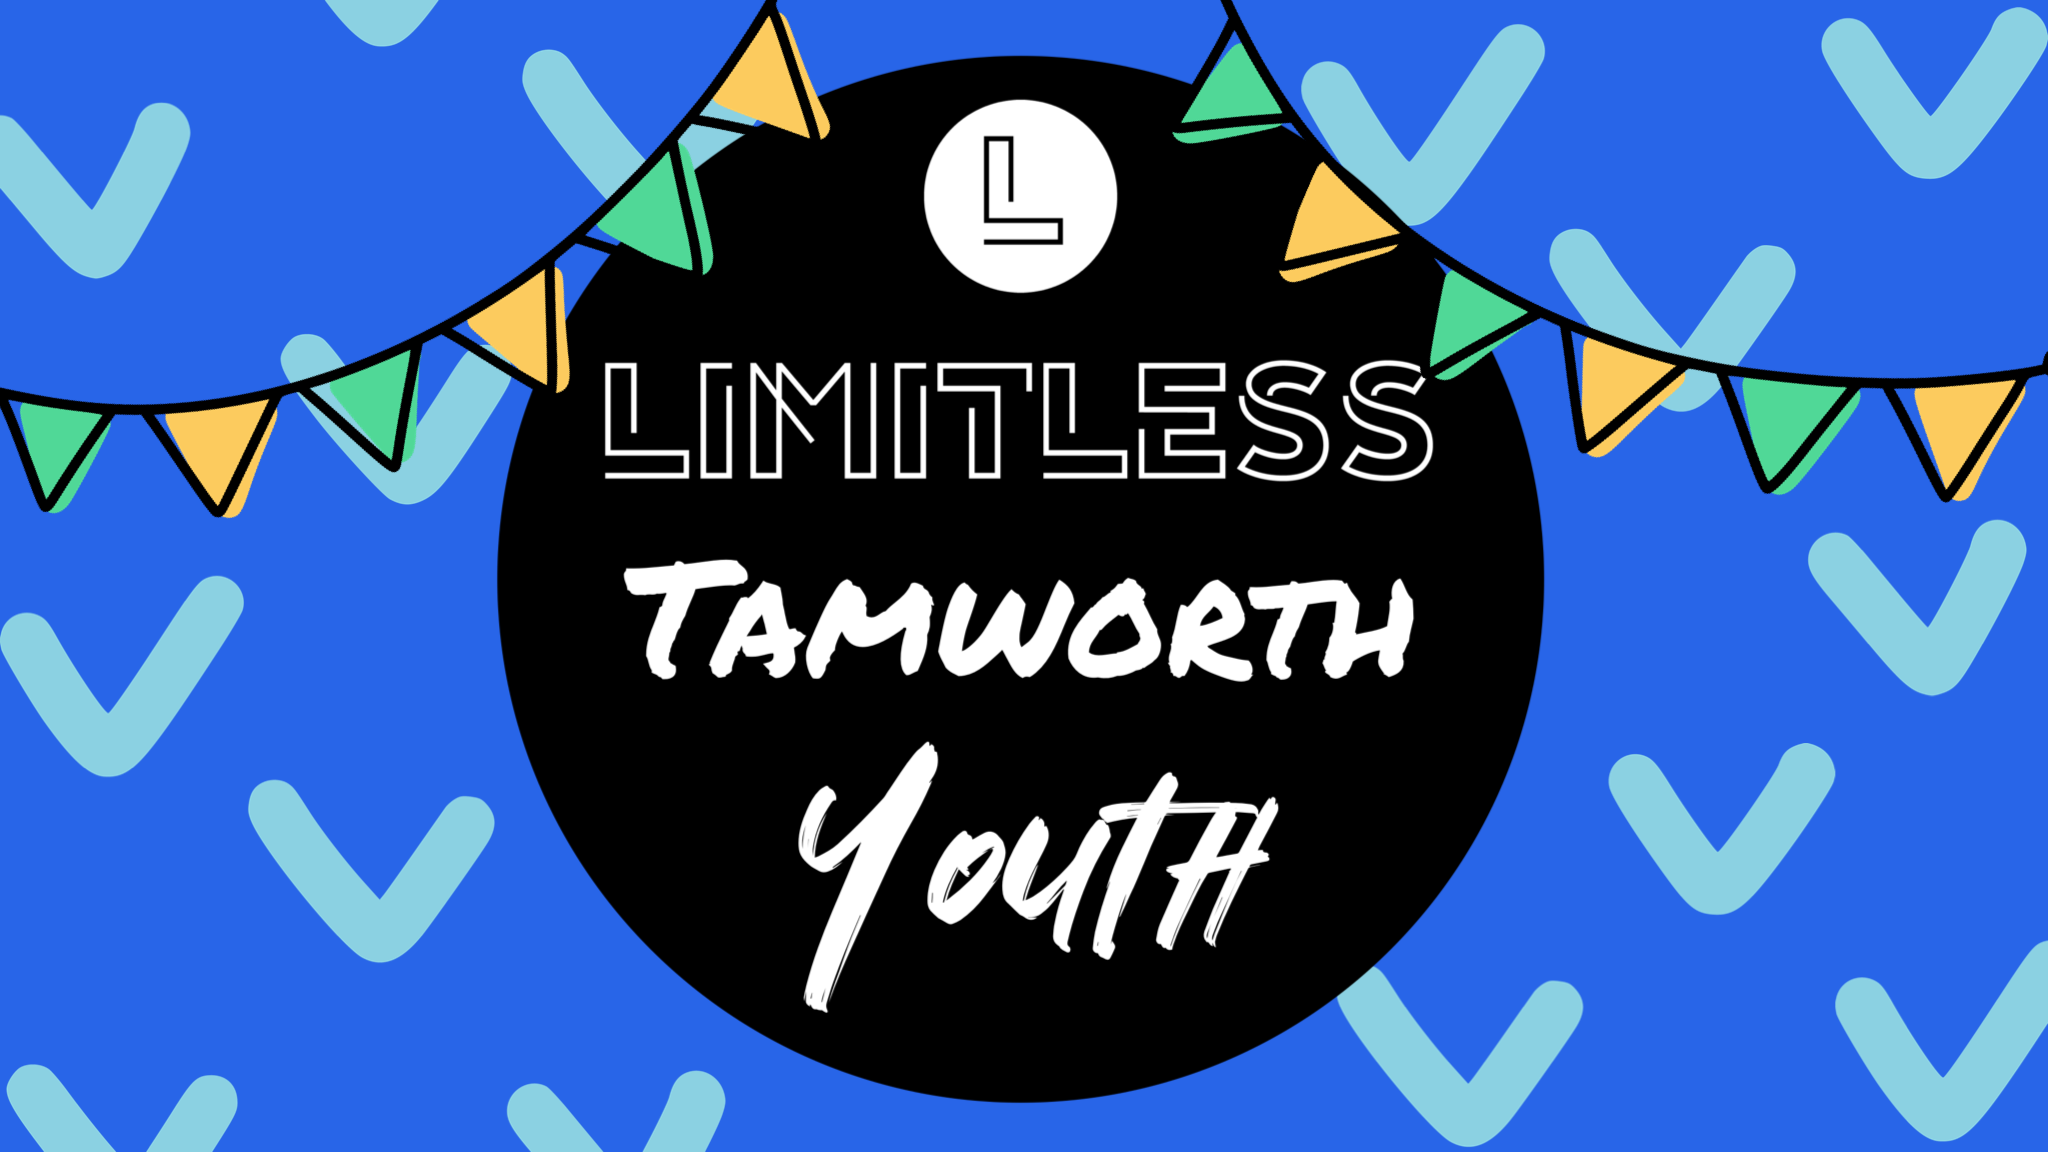 Limitless Youth